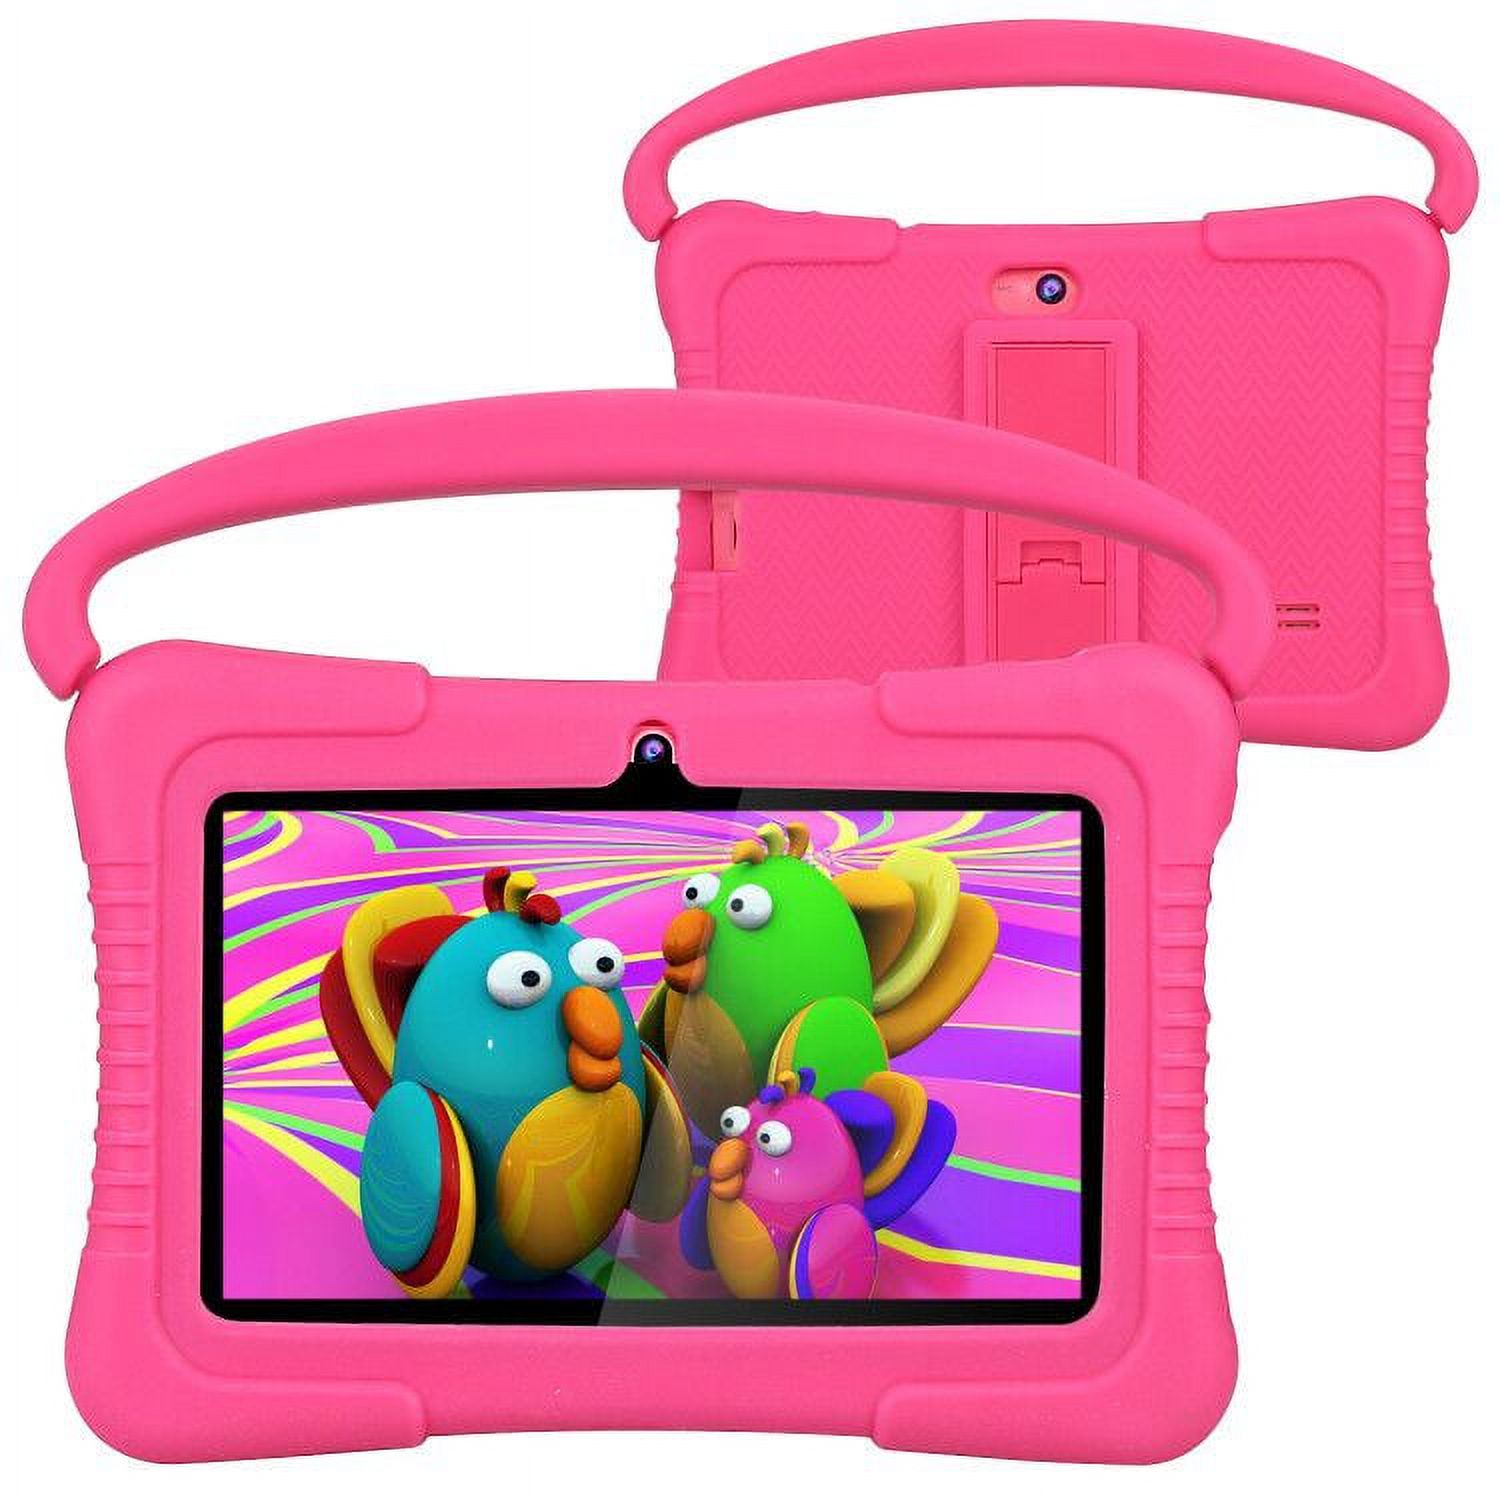 Kids Tablet, 7 Inch Android 10 Tablet for Kids, 2GB +32GB, Kid Mode Pre-Installed, WiFi Android Tablet, Kid-Proof Case - image 1 of 7